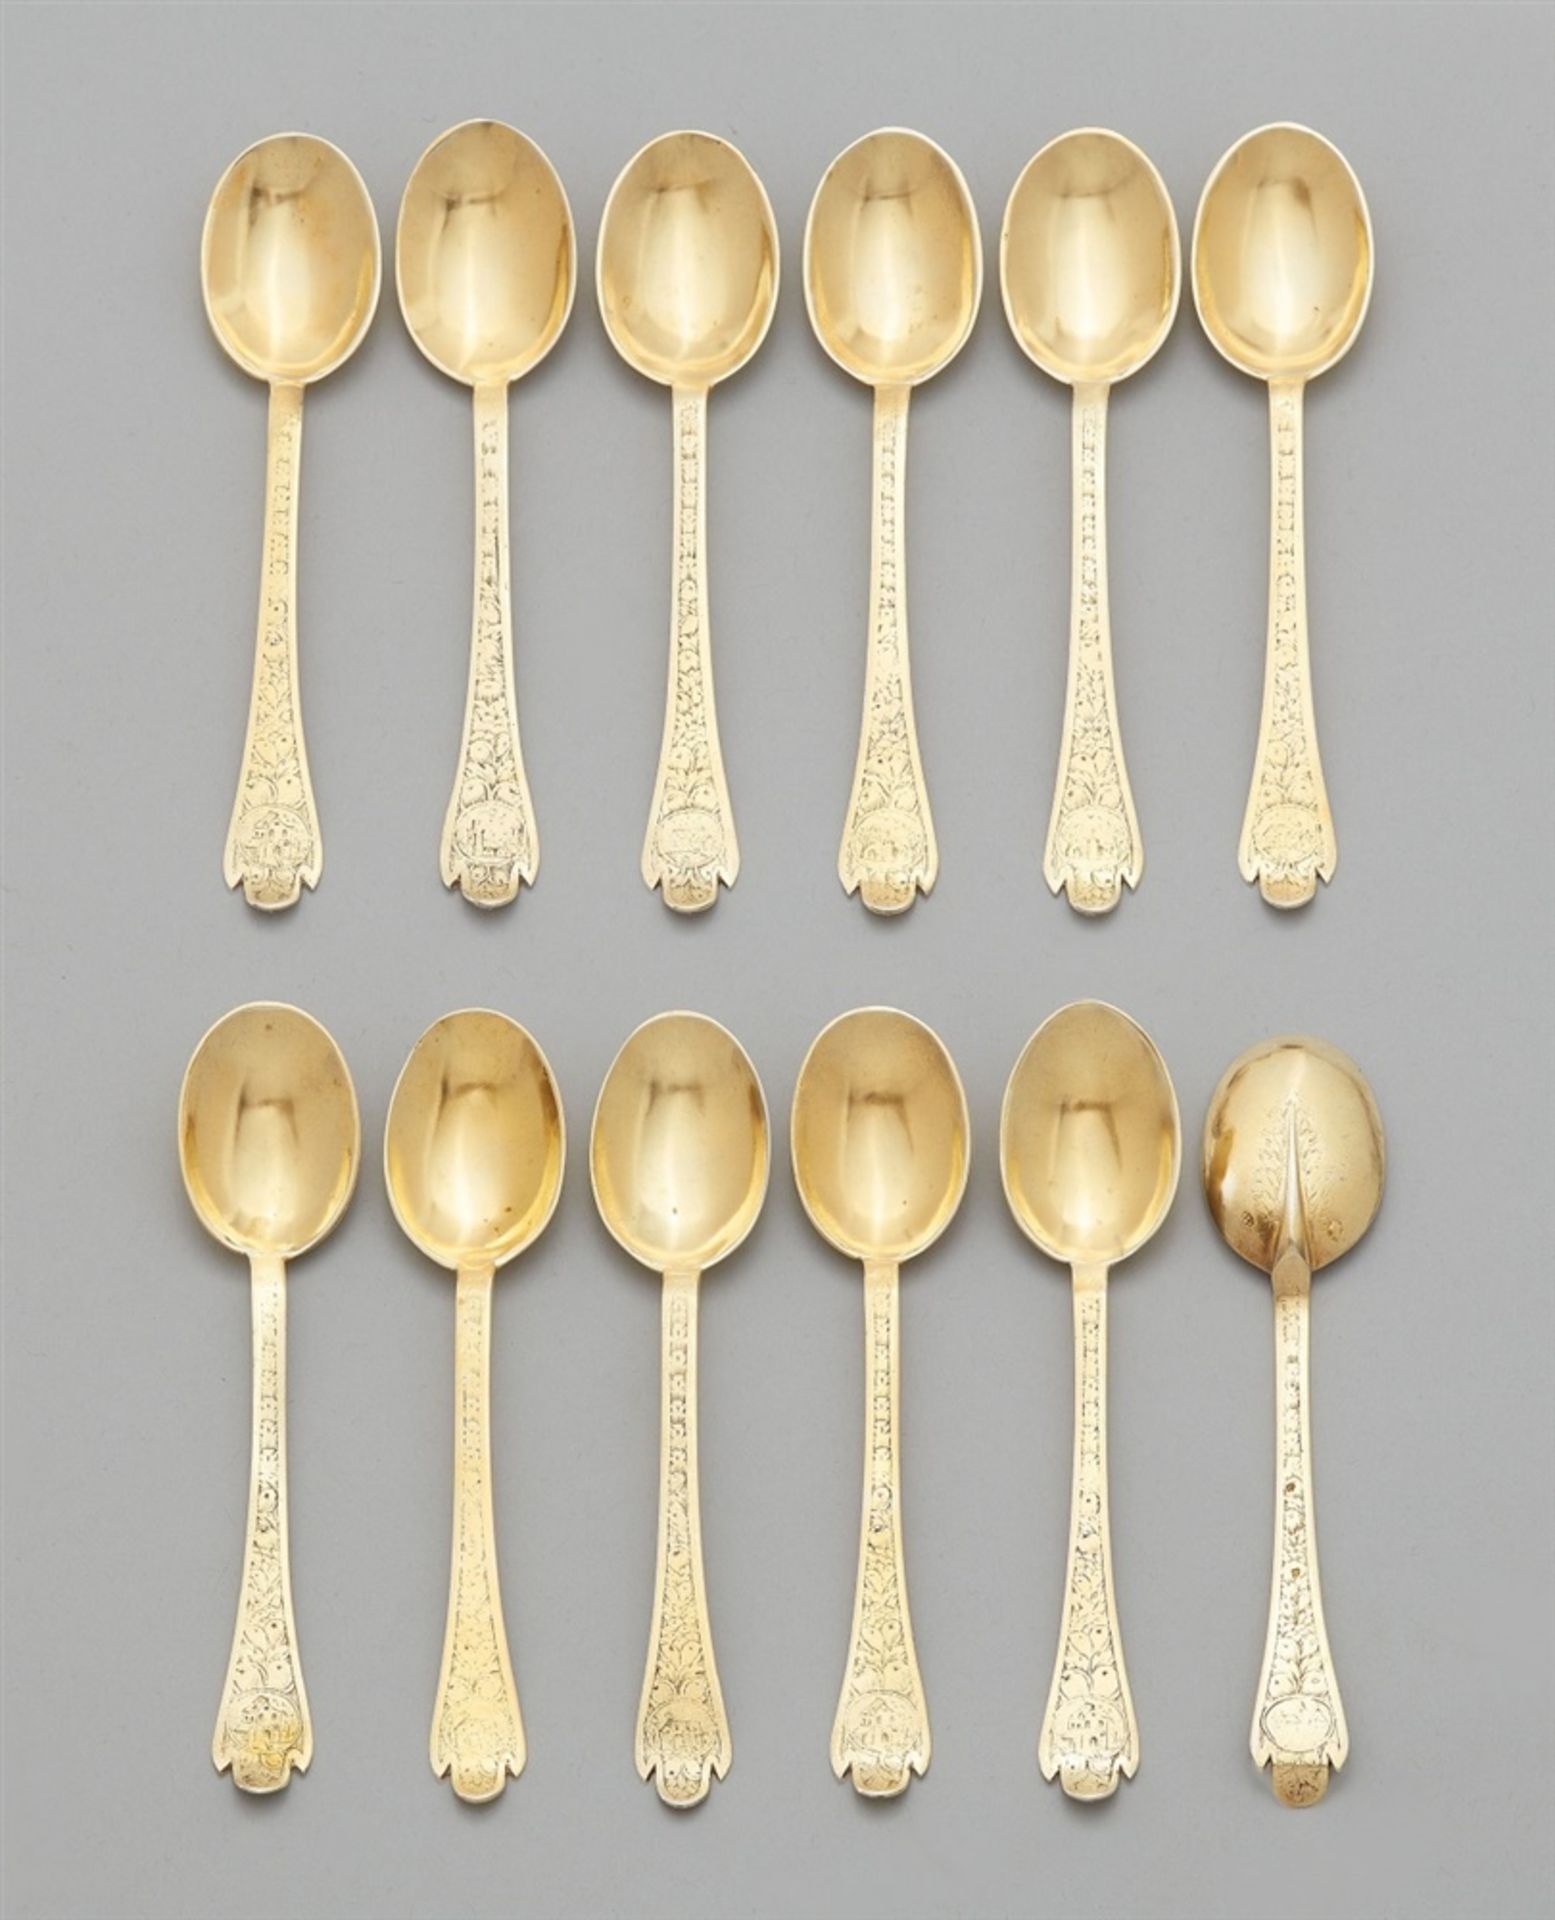 12 Baroque silver spoonsSilver-gilt spoons with oval bowls, the terminals decorated on either side